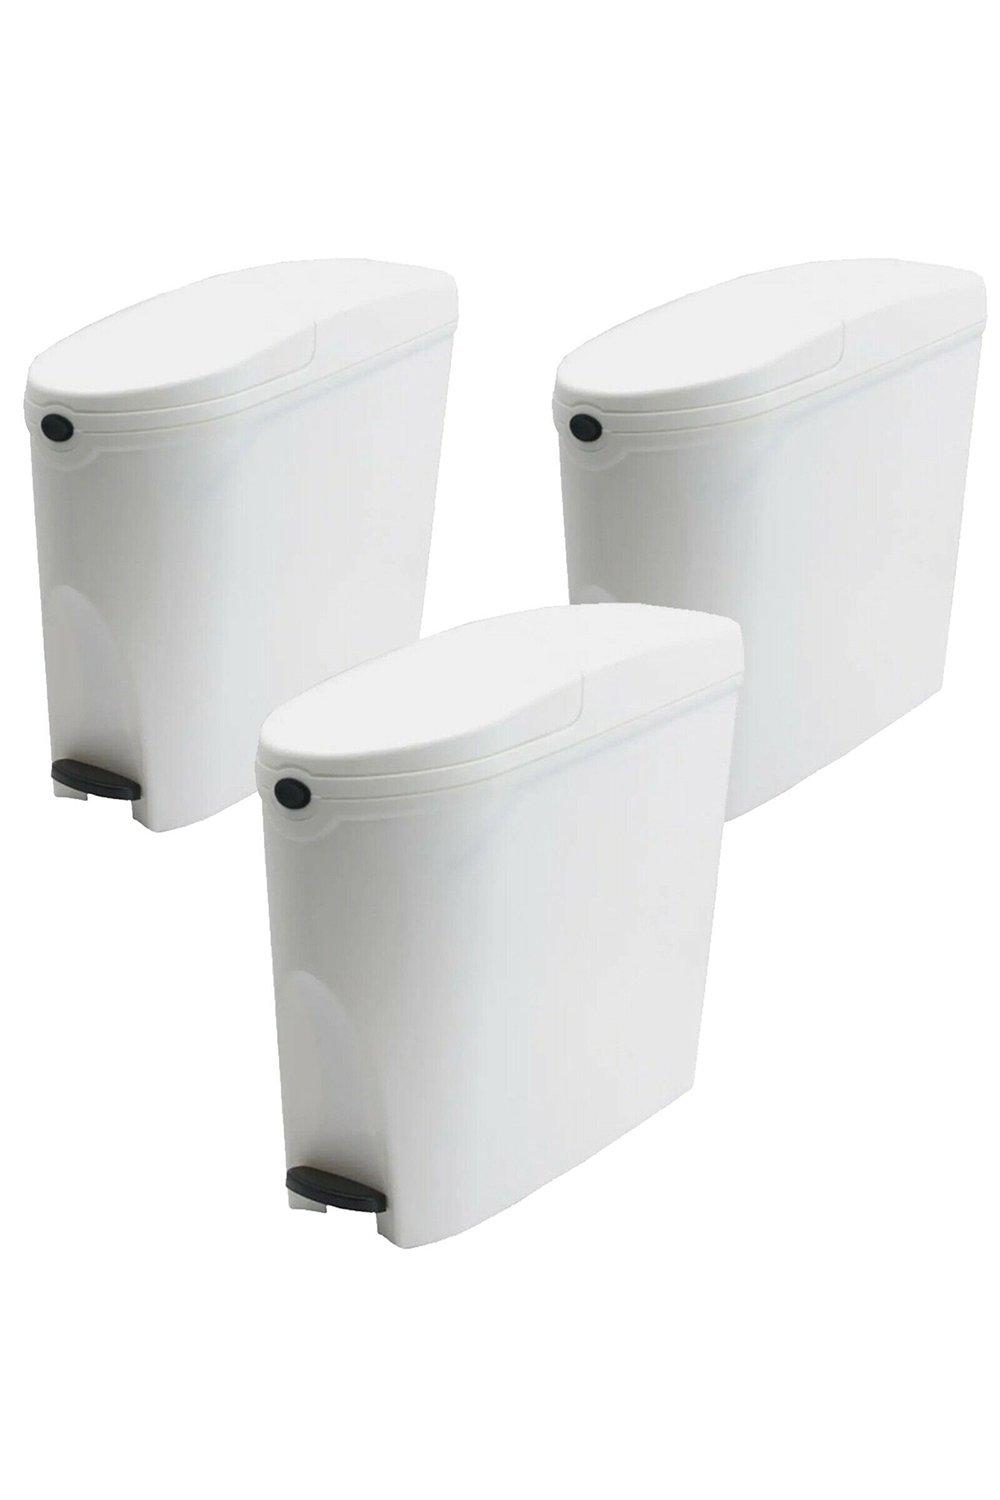 White Pedal Operated Toilet Sanitary Bin 3 x 20 Litre Capacity